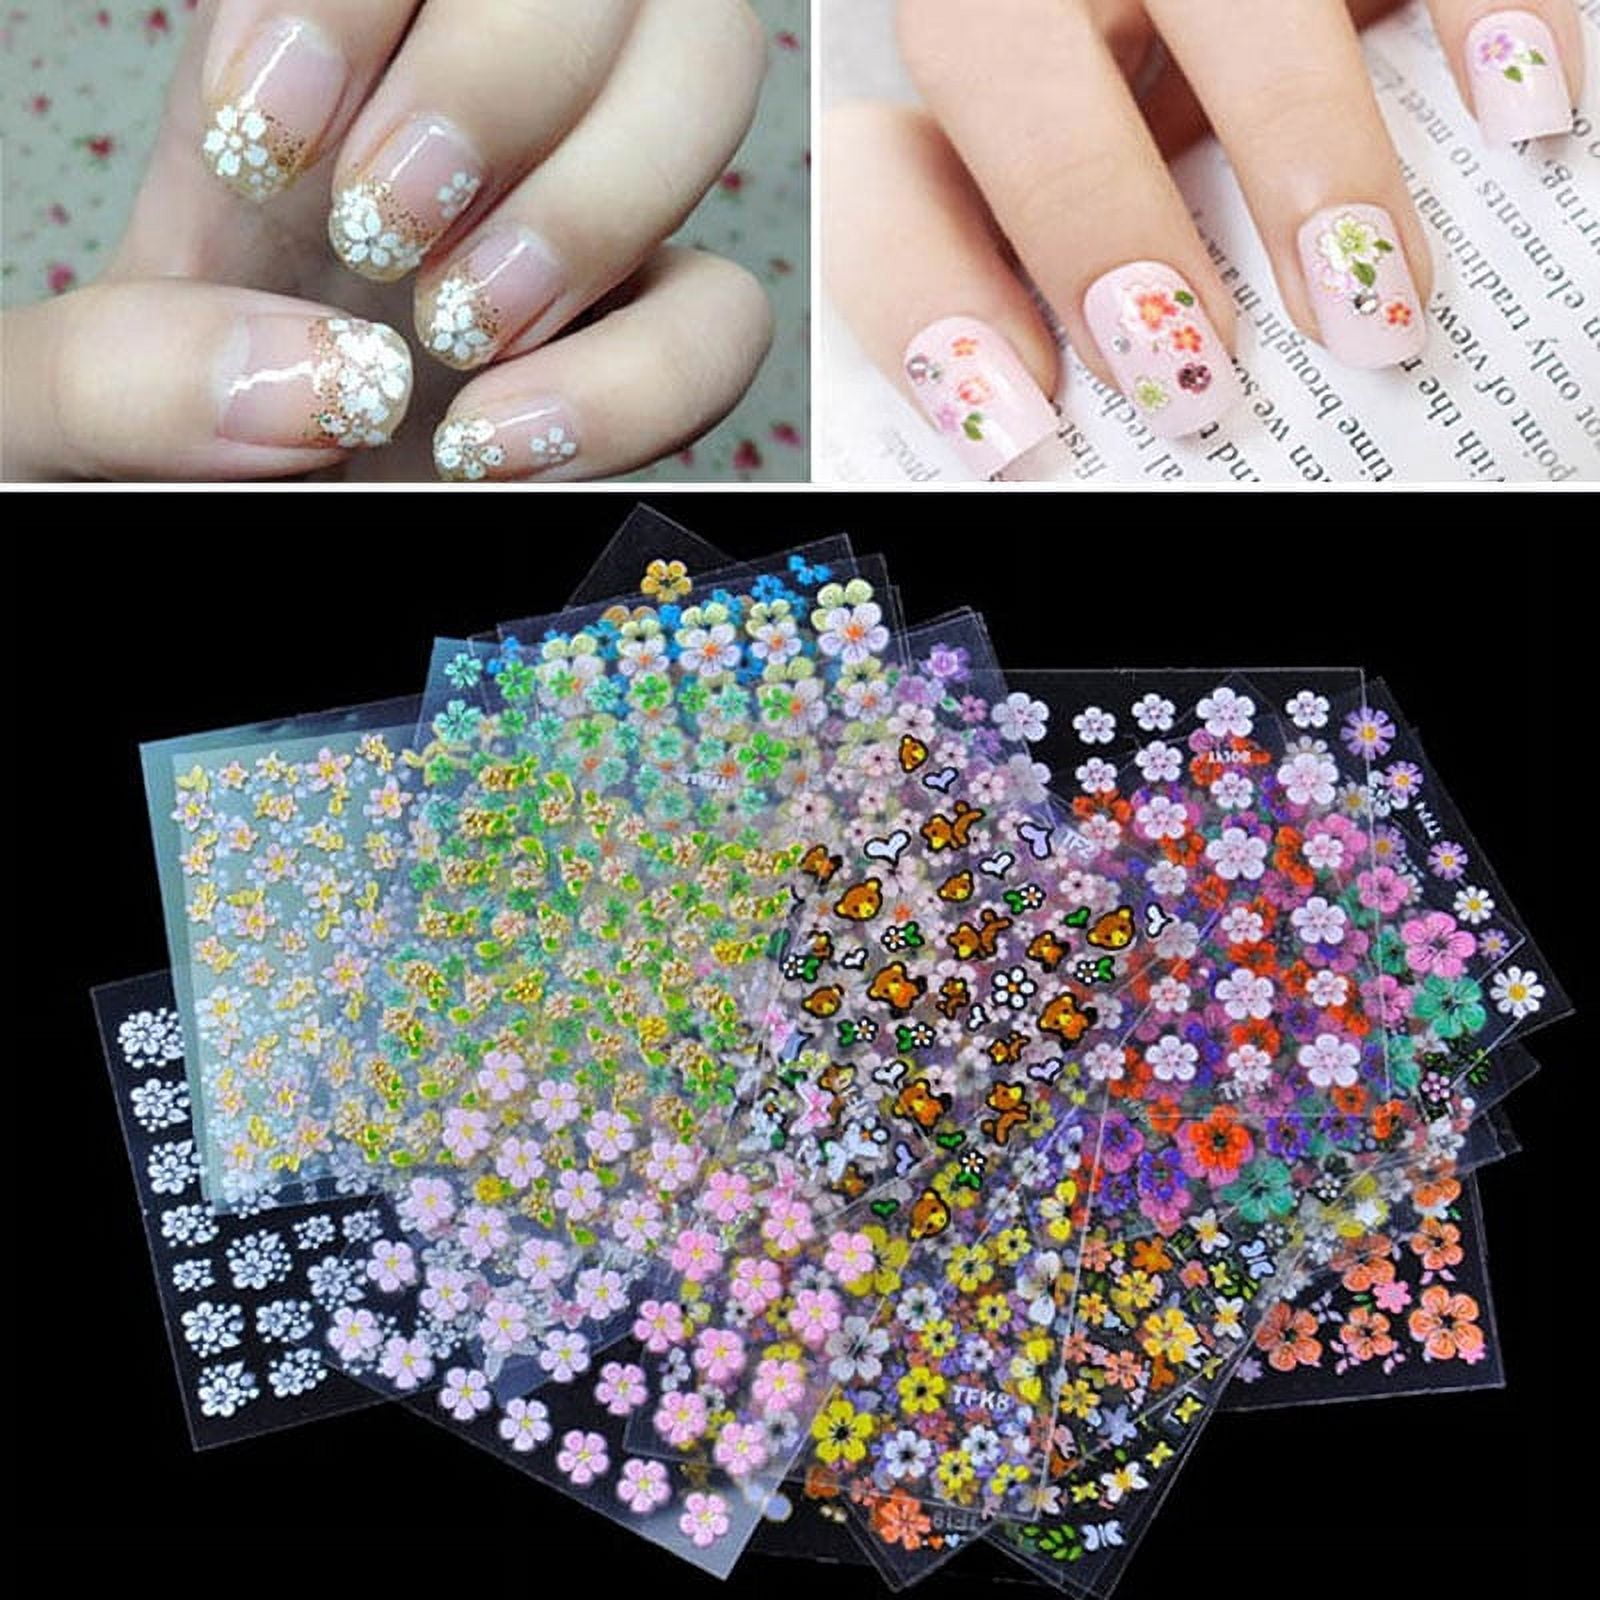 30 pcs Floral Design Manicure Transfer Nail Art Tips Stickers Decals 3D ...